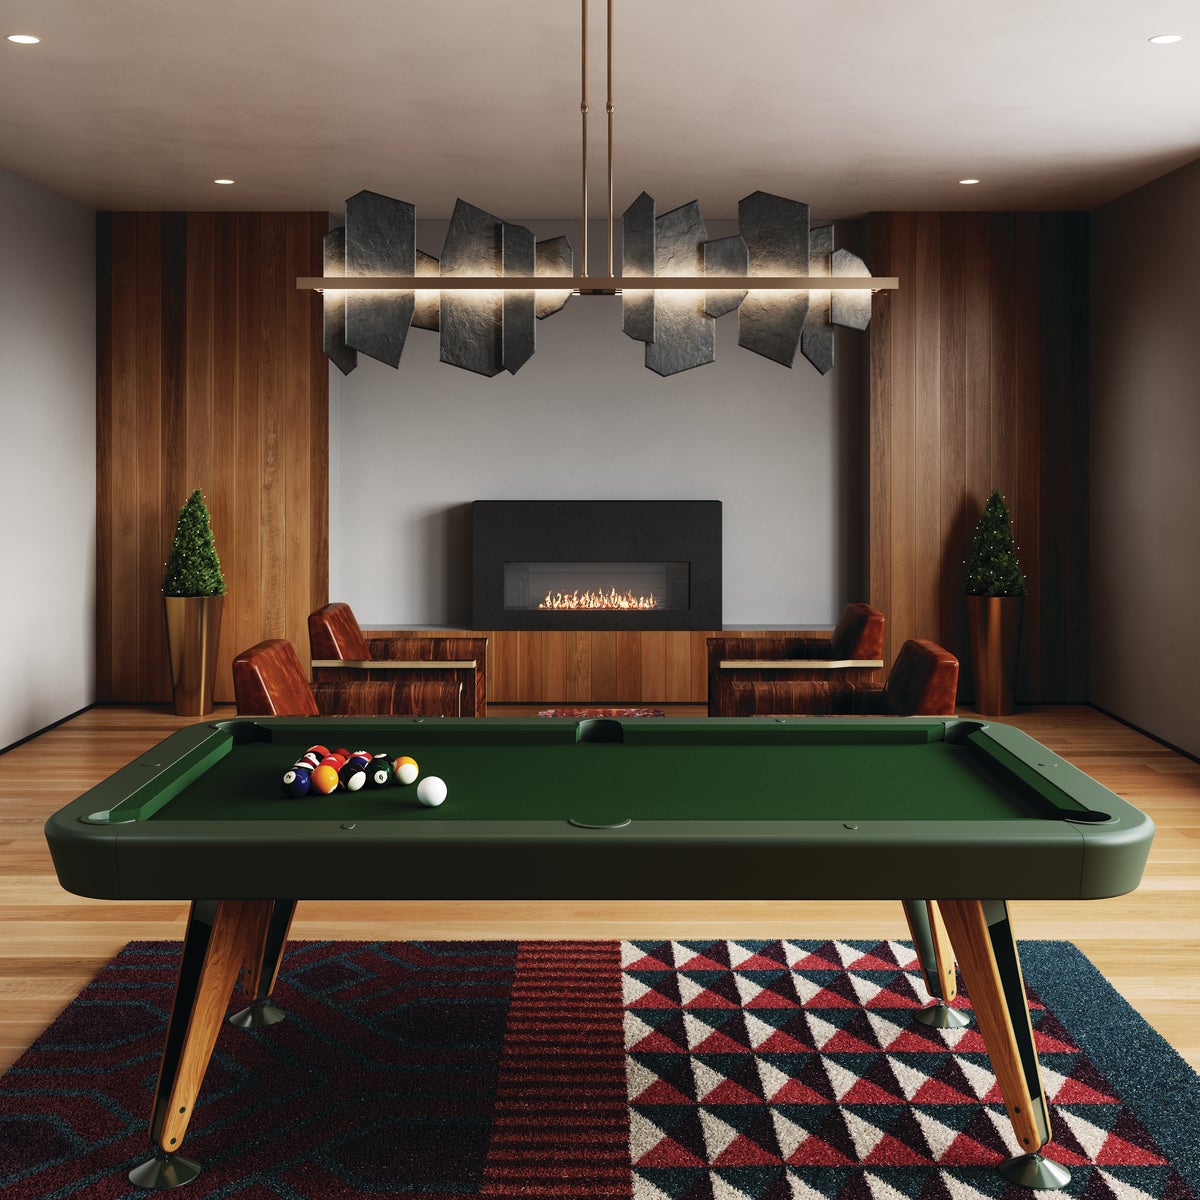 A pool table in a large and warm modern room.